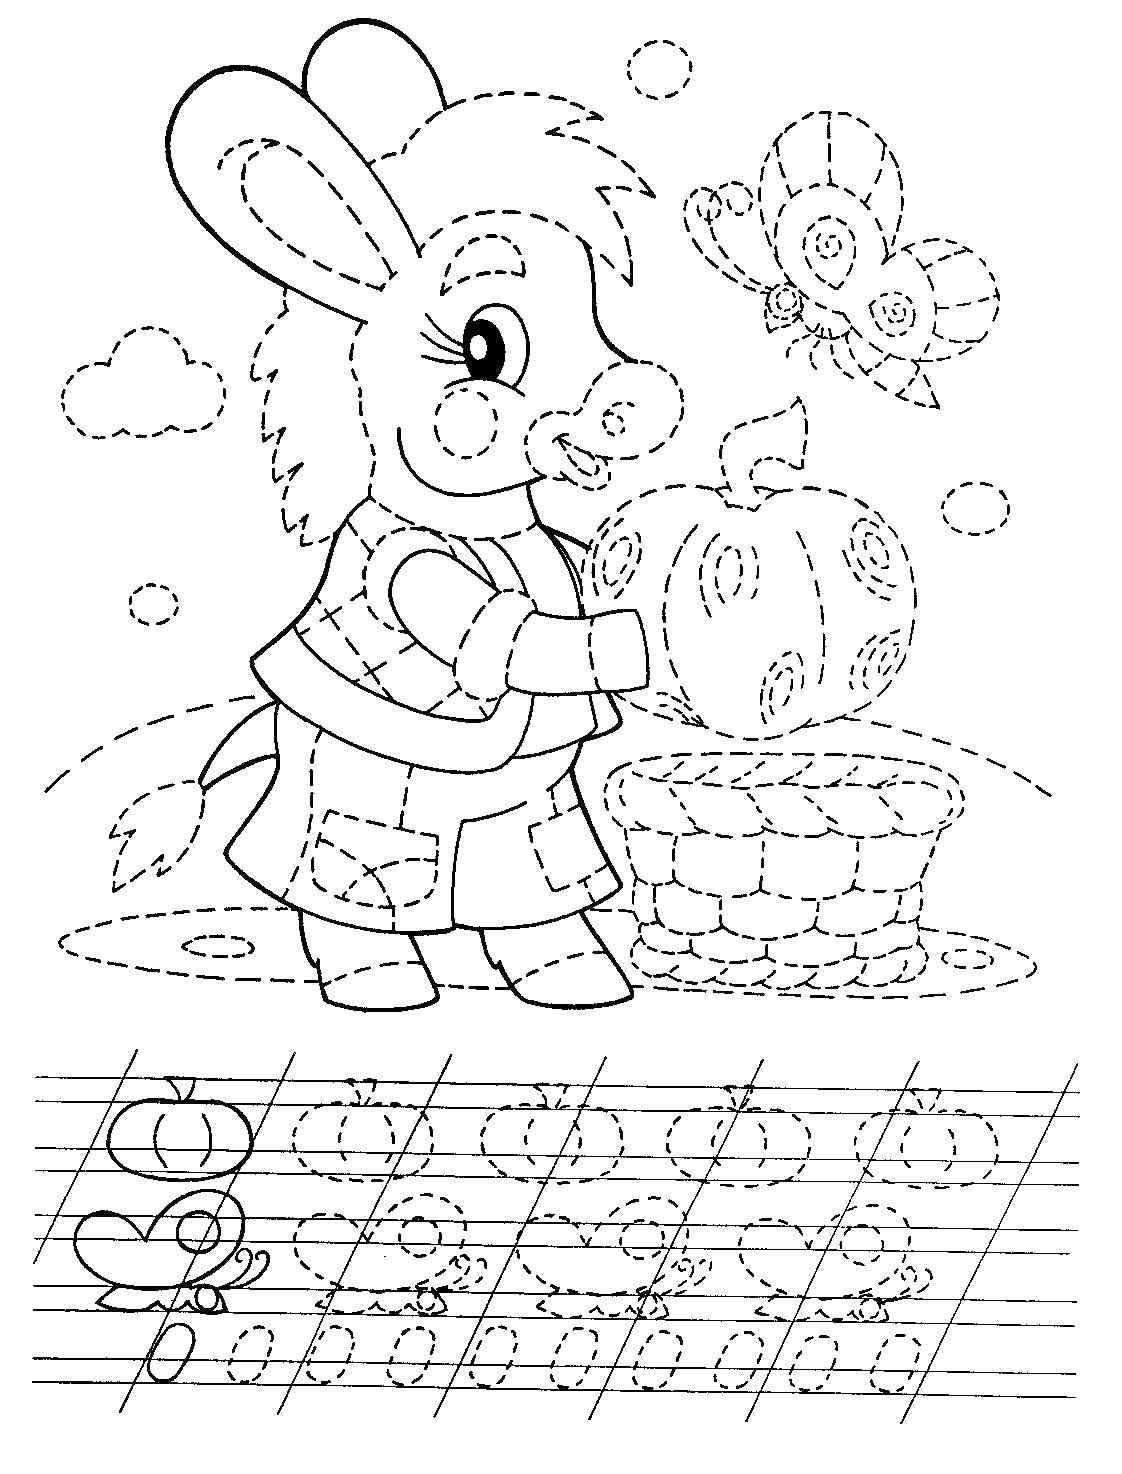 Coloring Recipe with horse. Category school. Tags:  the horse, pumpkin, butterfly, cursive;.